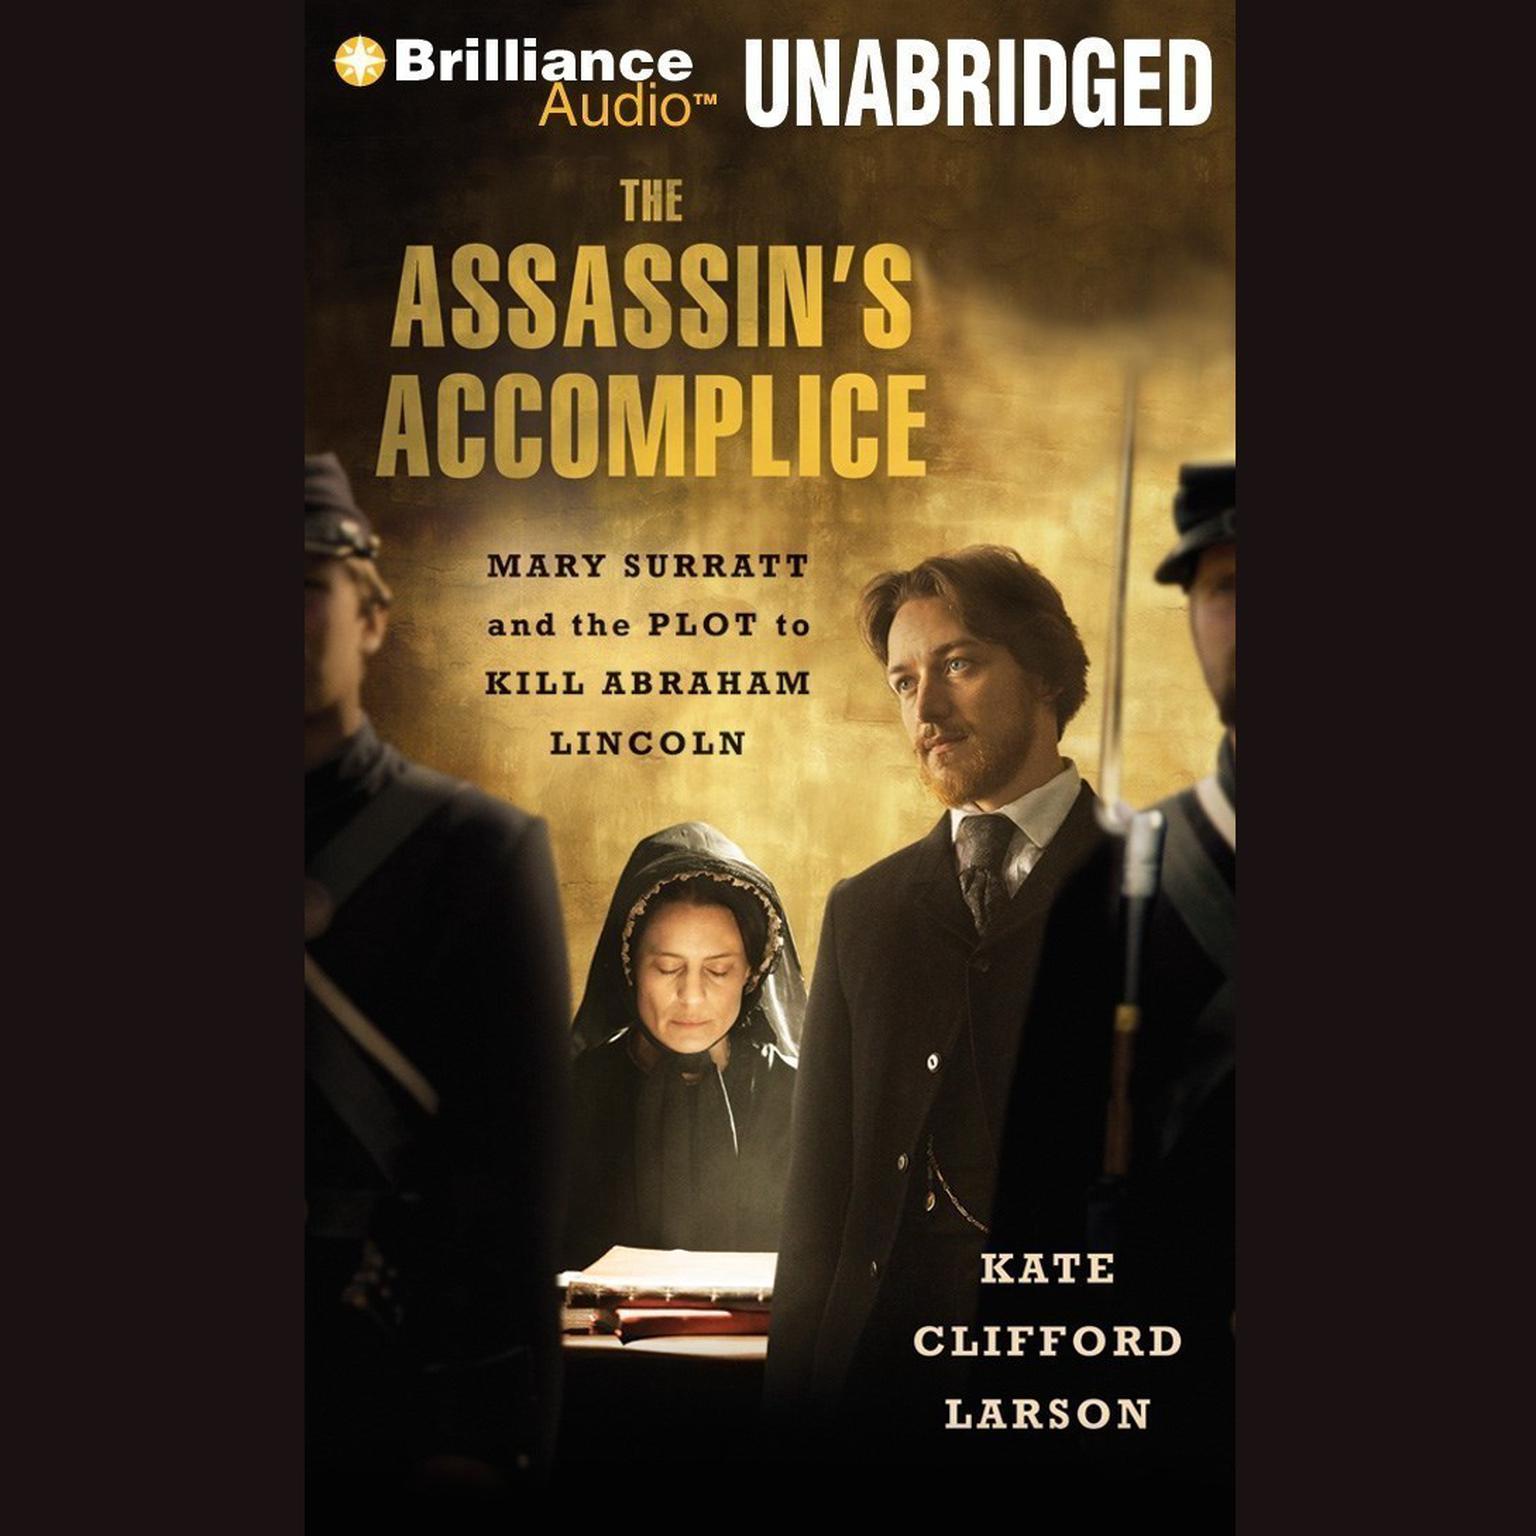 The Assassins Accomplice: Mary Surratt and the Plot to Kill Abraham Lincoln Audiobook, by Kate Clifford Larson